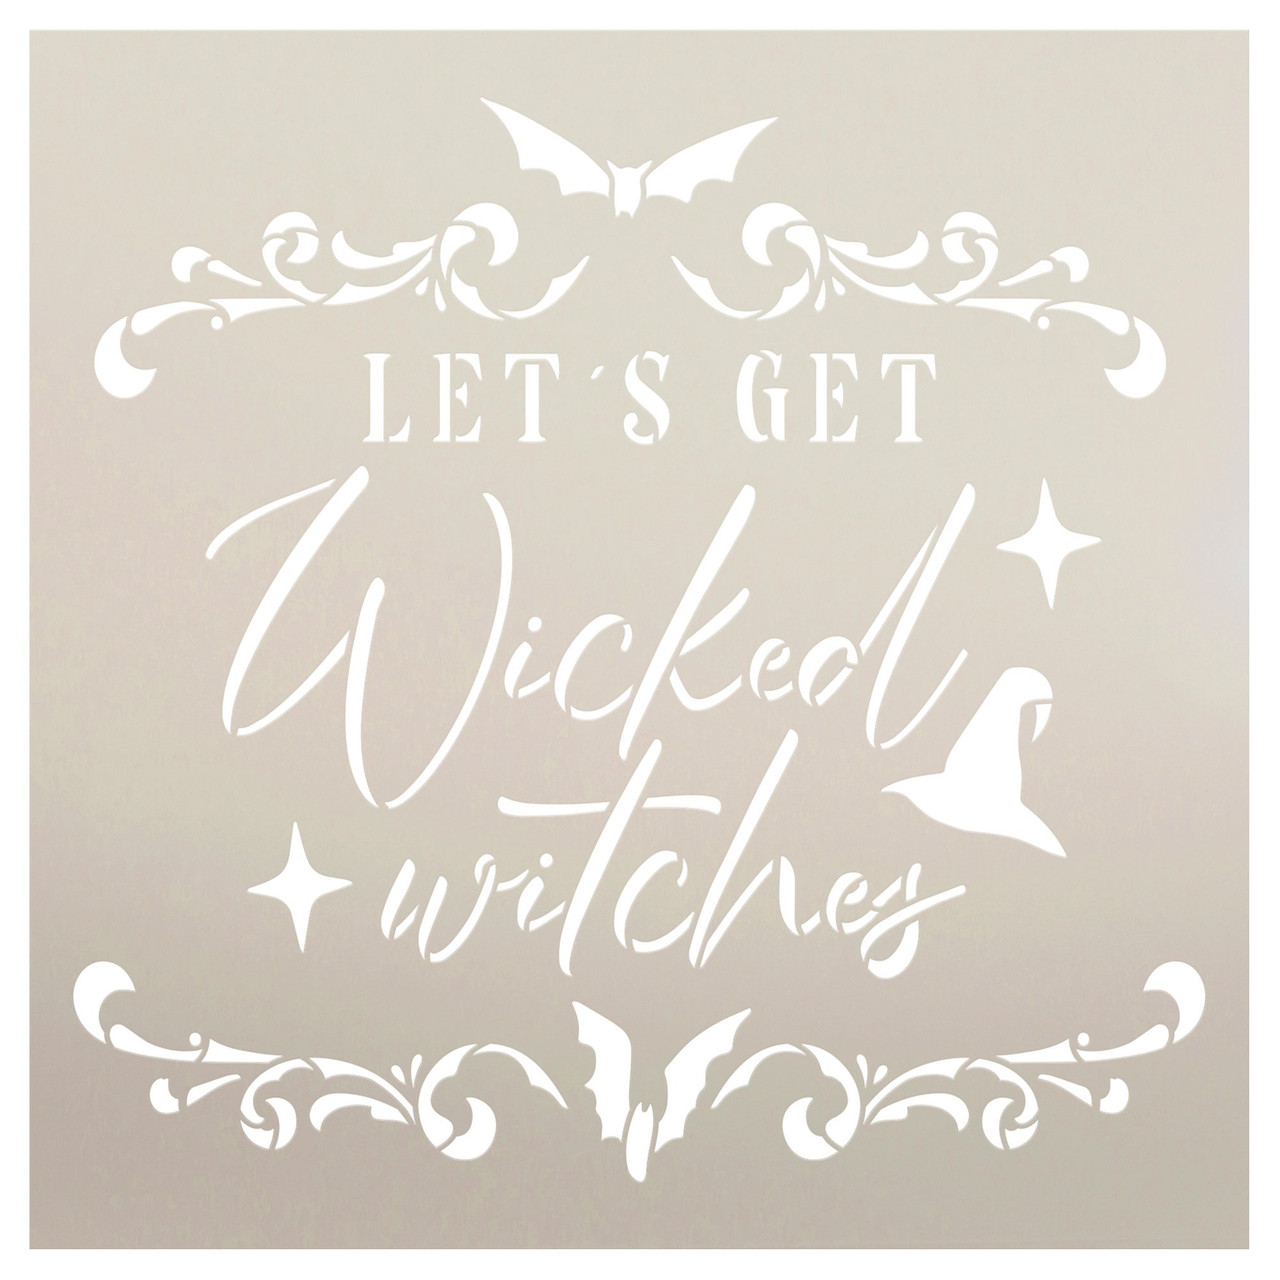 Let's Get Wicked Witches Stencil by StudioR12 - Select Size - USA Made - Craft DIY Living Room Home Decor | Paint Halloween Fall Wood Sign | Reusable Mylar Template